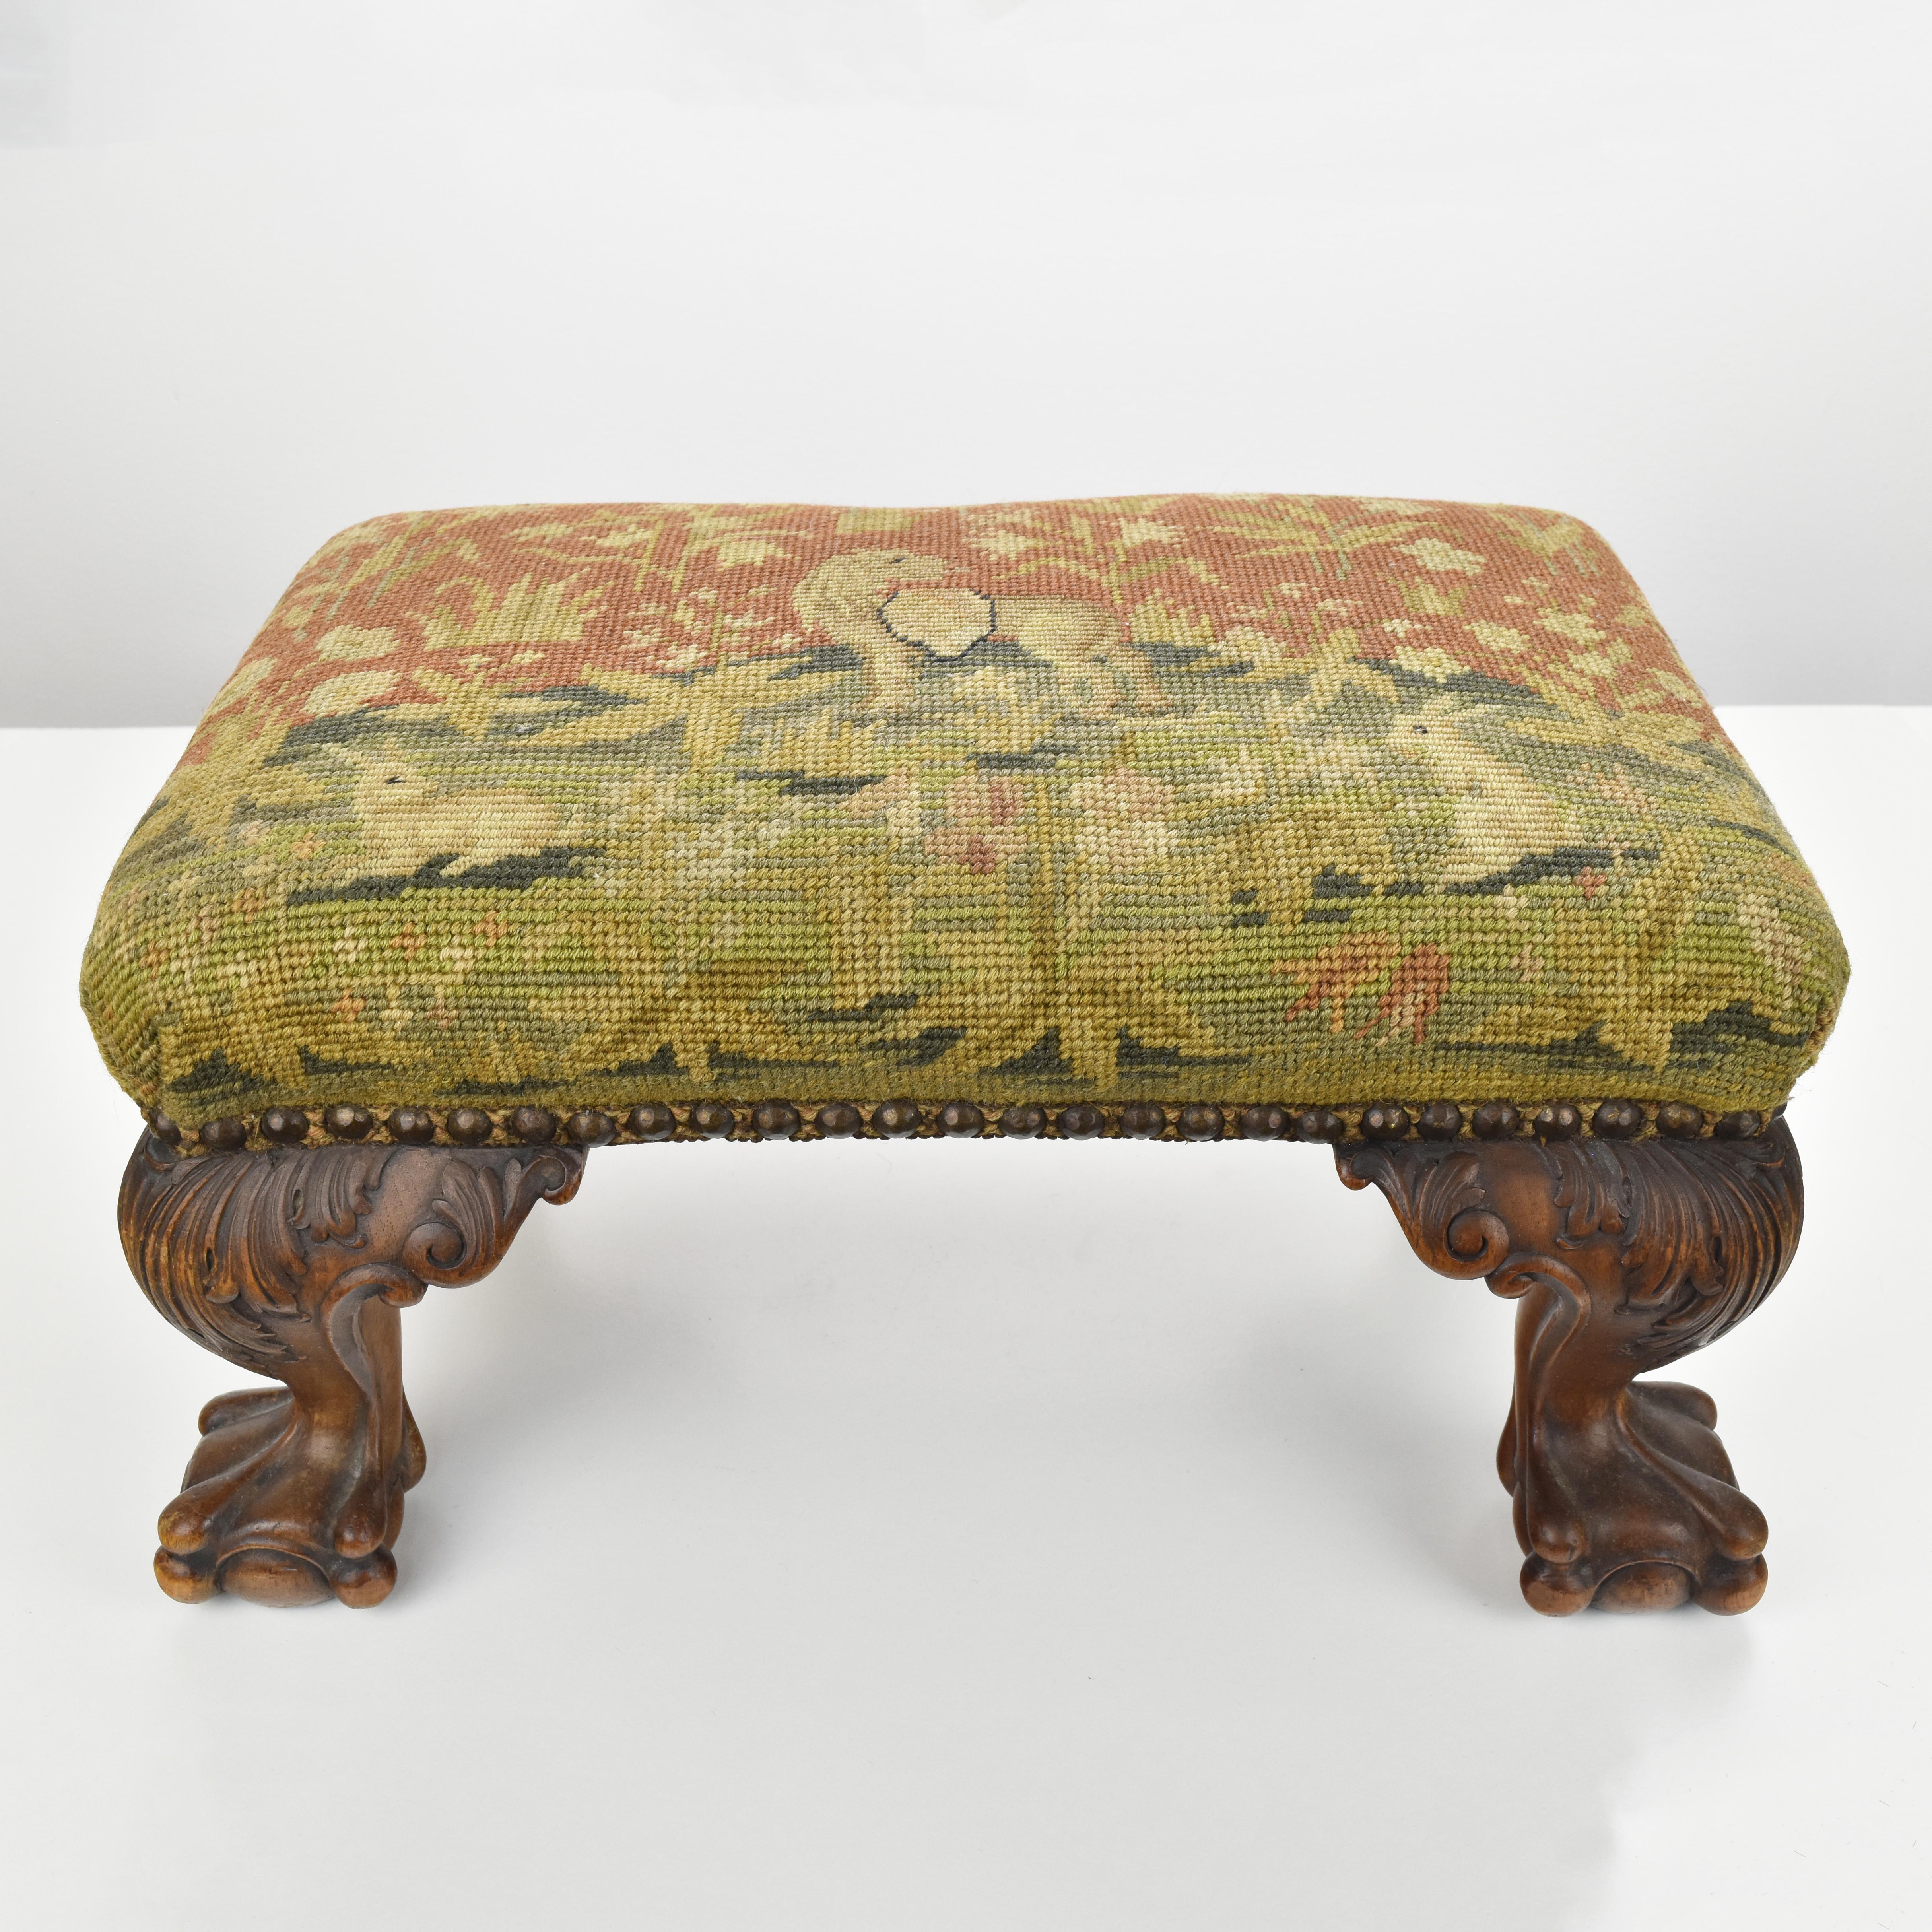 An antique early Victorian footstool with finely detailed hand-carved claw and ball feet made of walnut wood, upholstered with a rich ornated Aubusson tapestry with an heraldic lion in centre, two white rabbits and rich floral foliage.